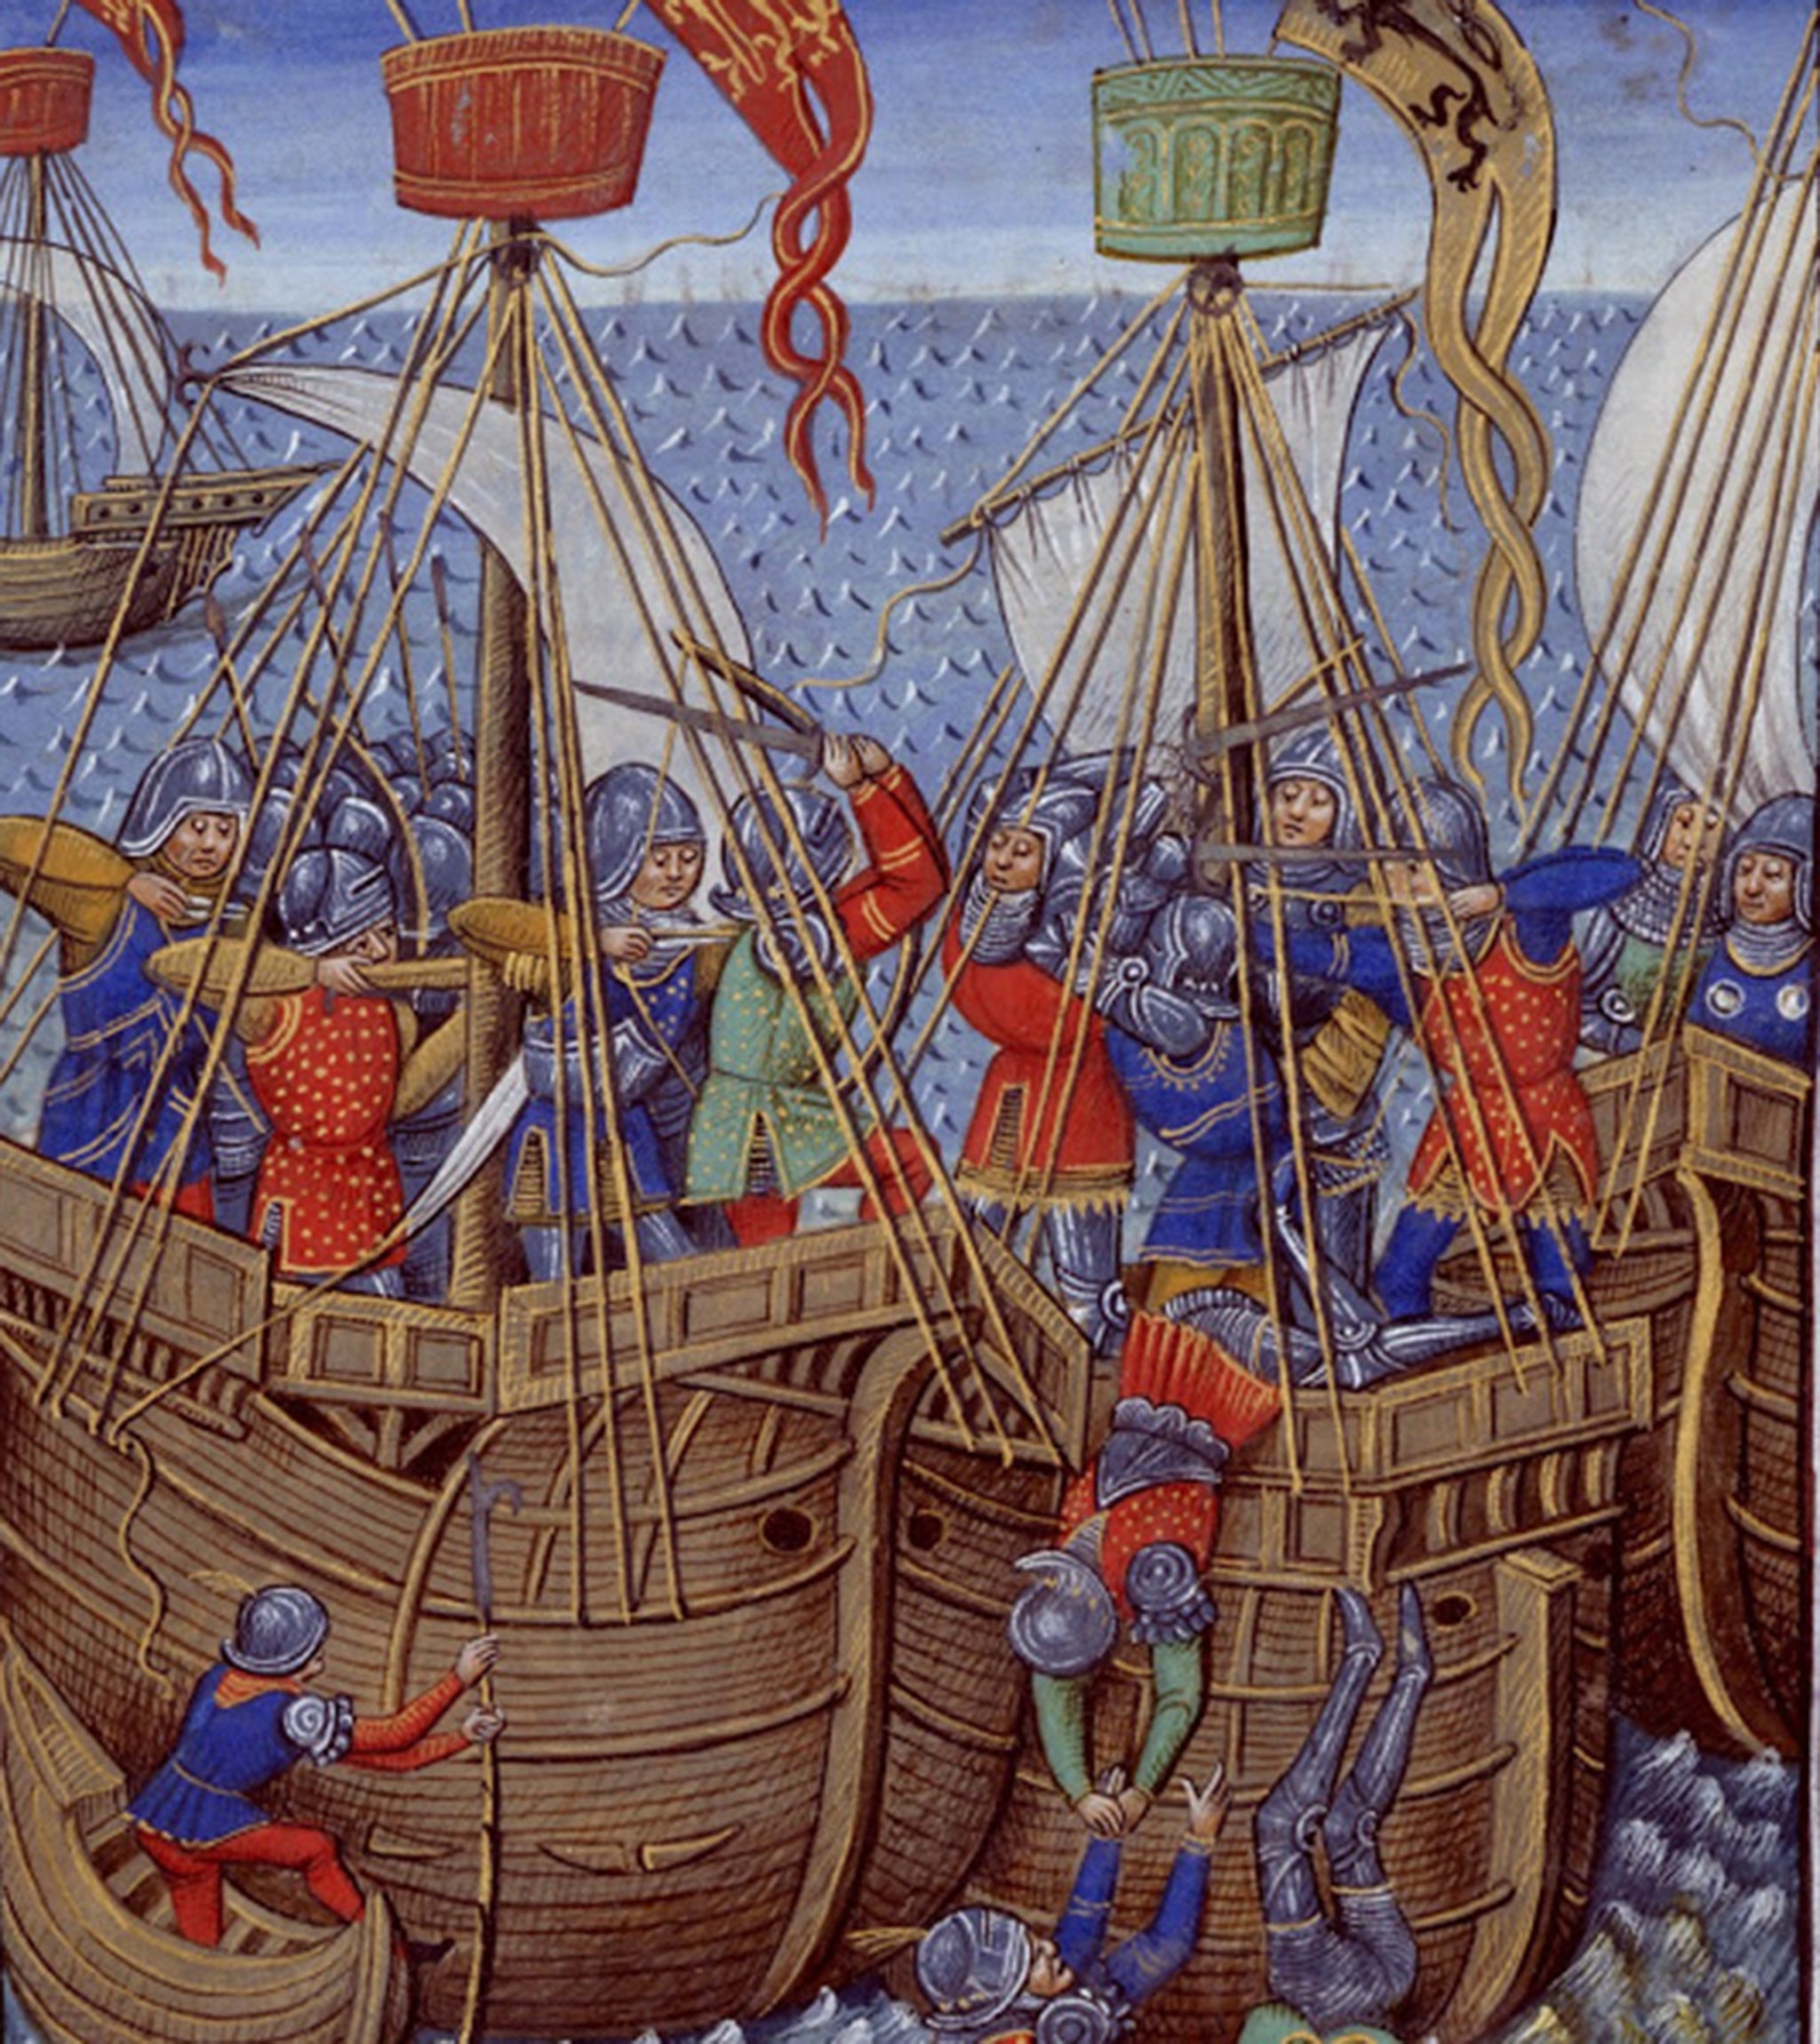 The sea battle illumination shows a naval engagement in the 15th century - between English and enemy ships